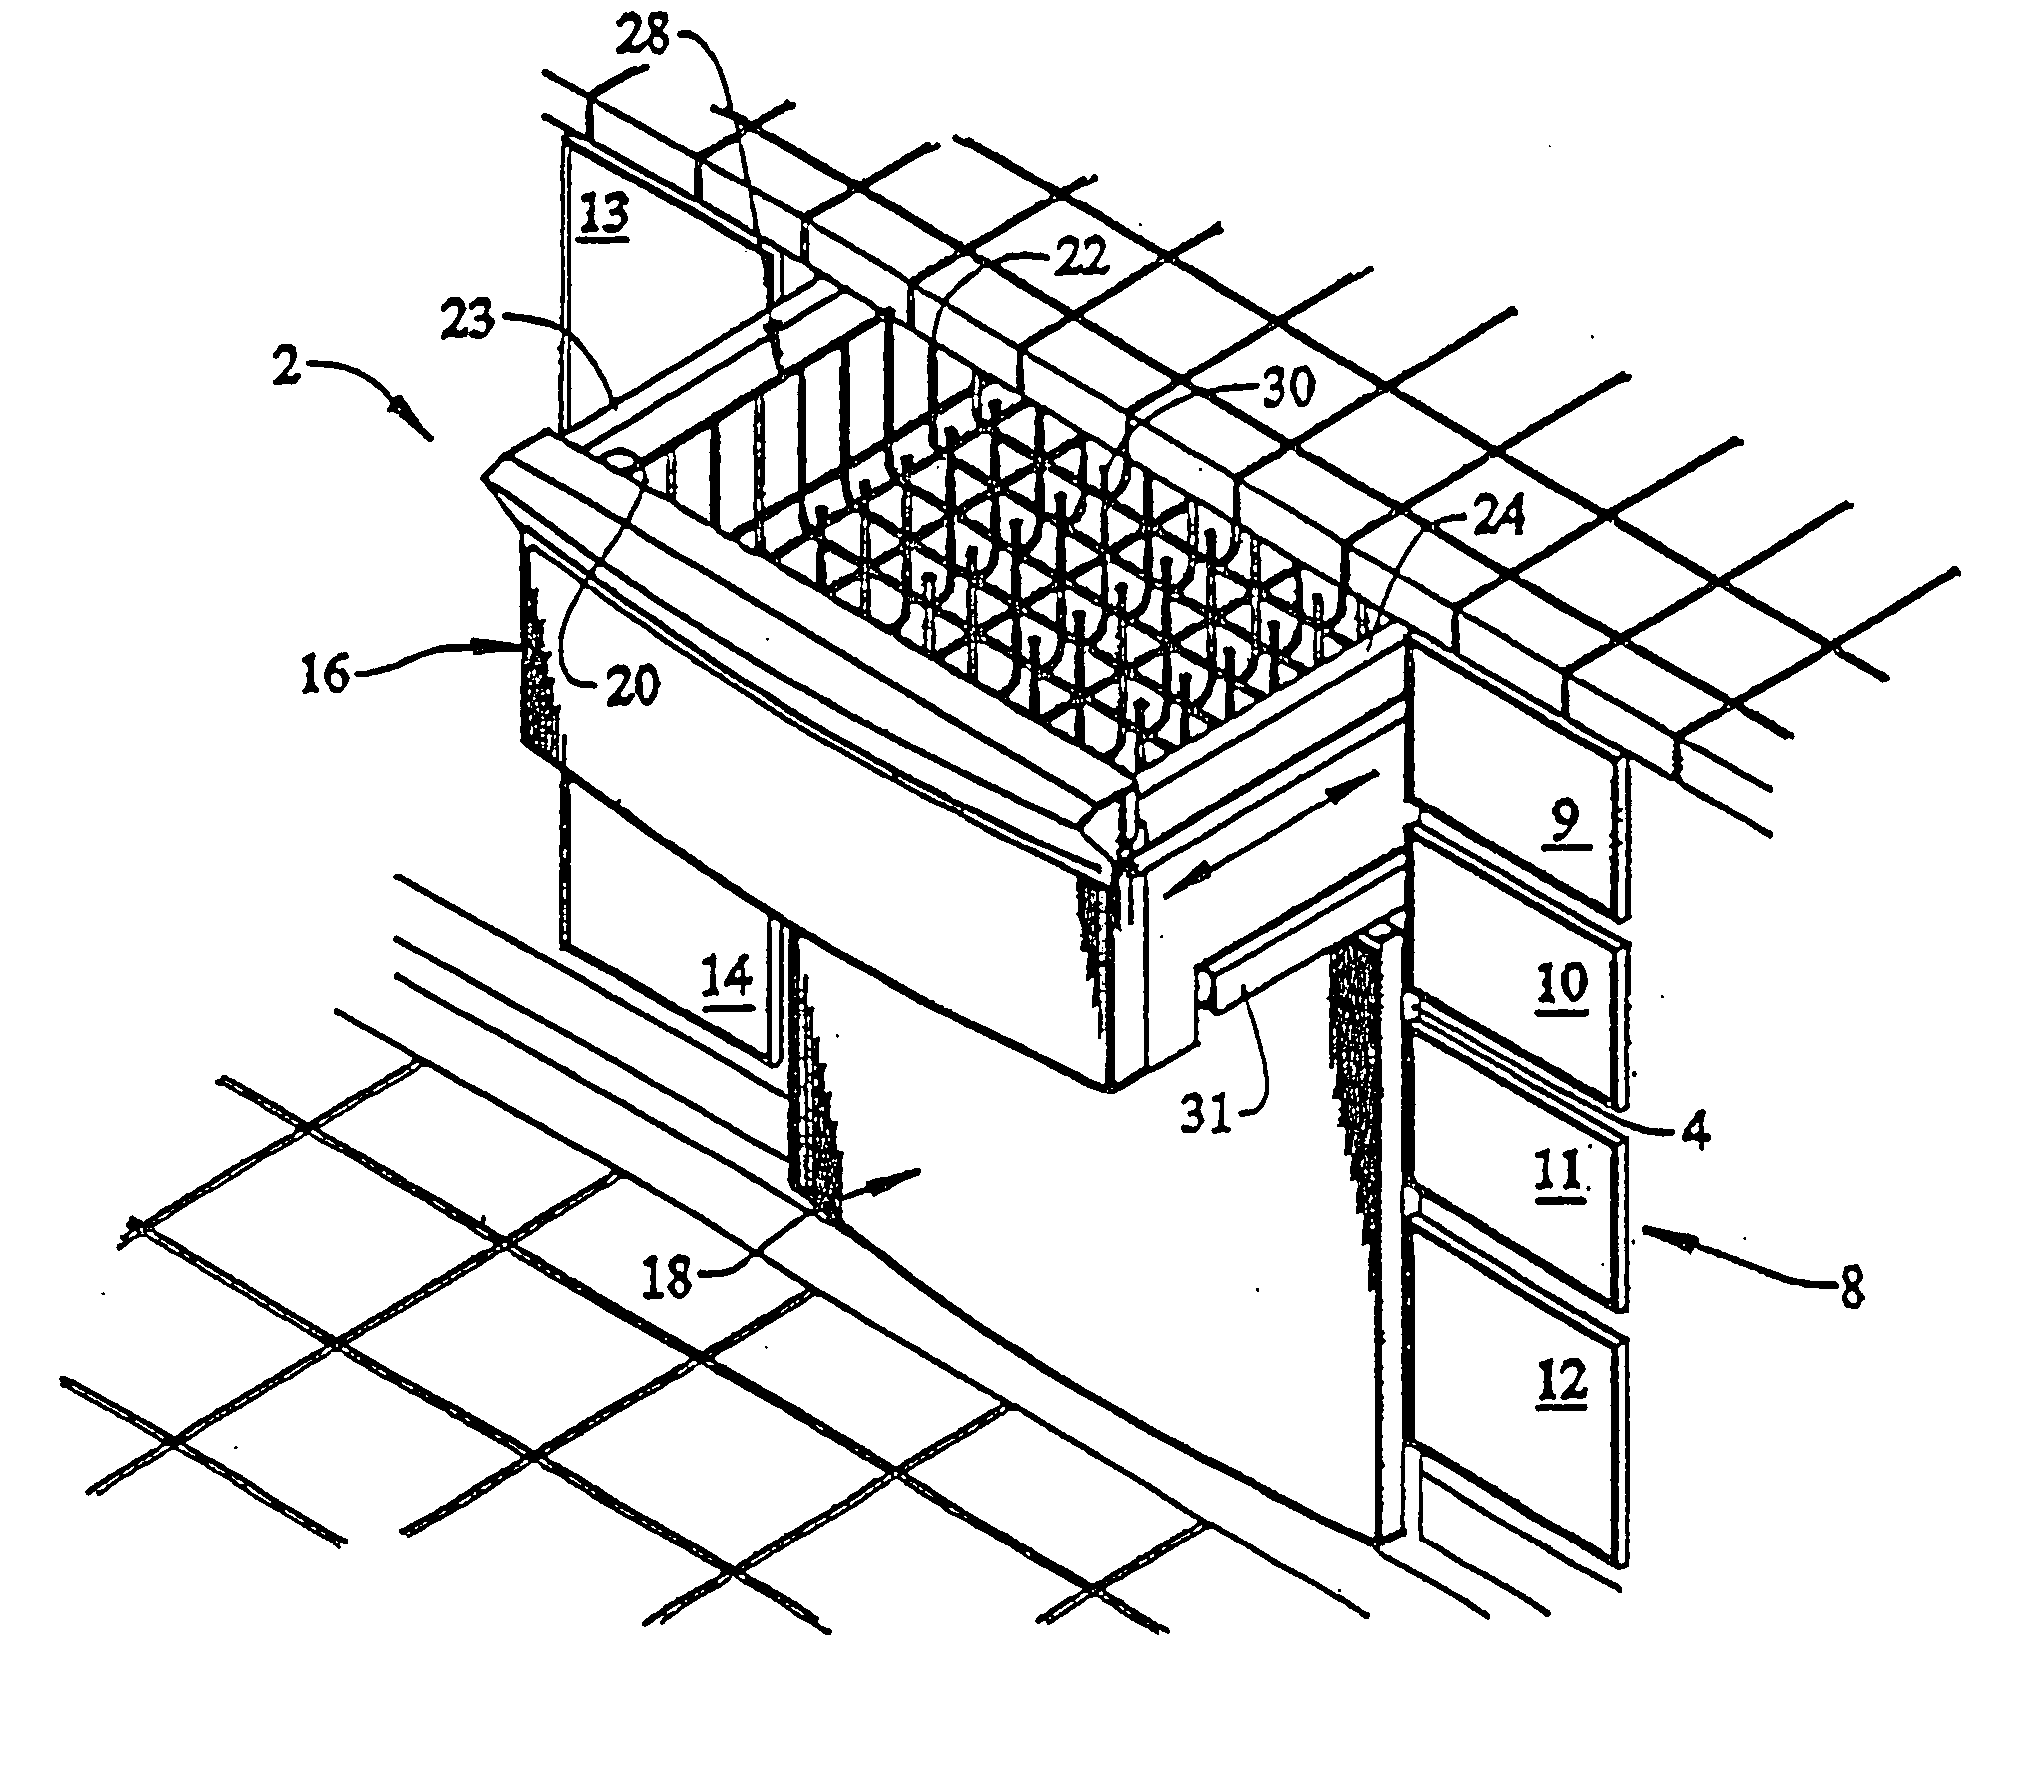 System for limiting pressure in a fine filter chamber for a dishwasher